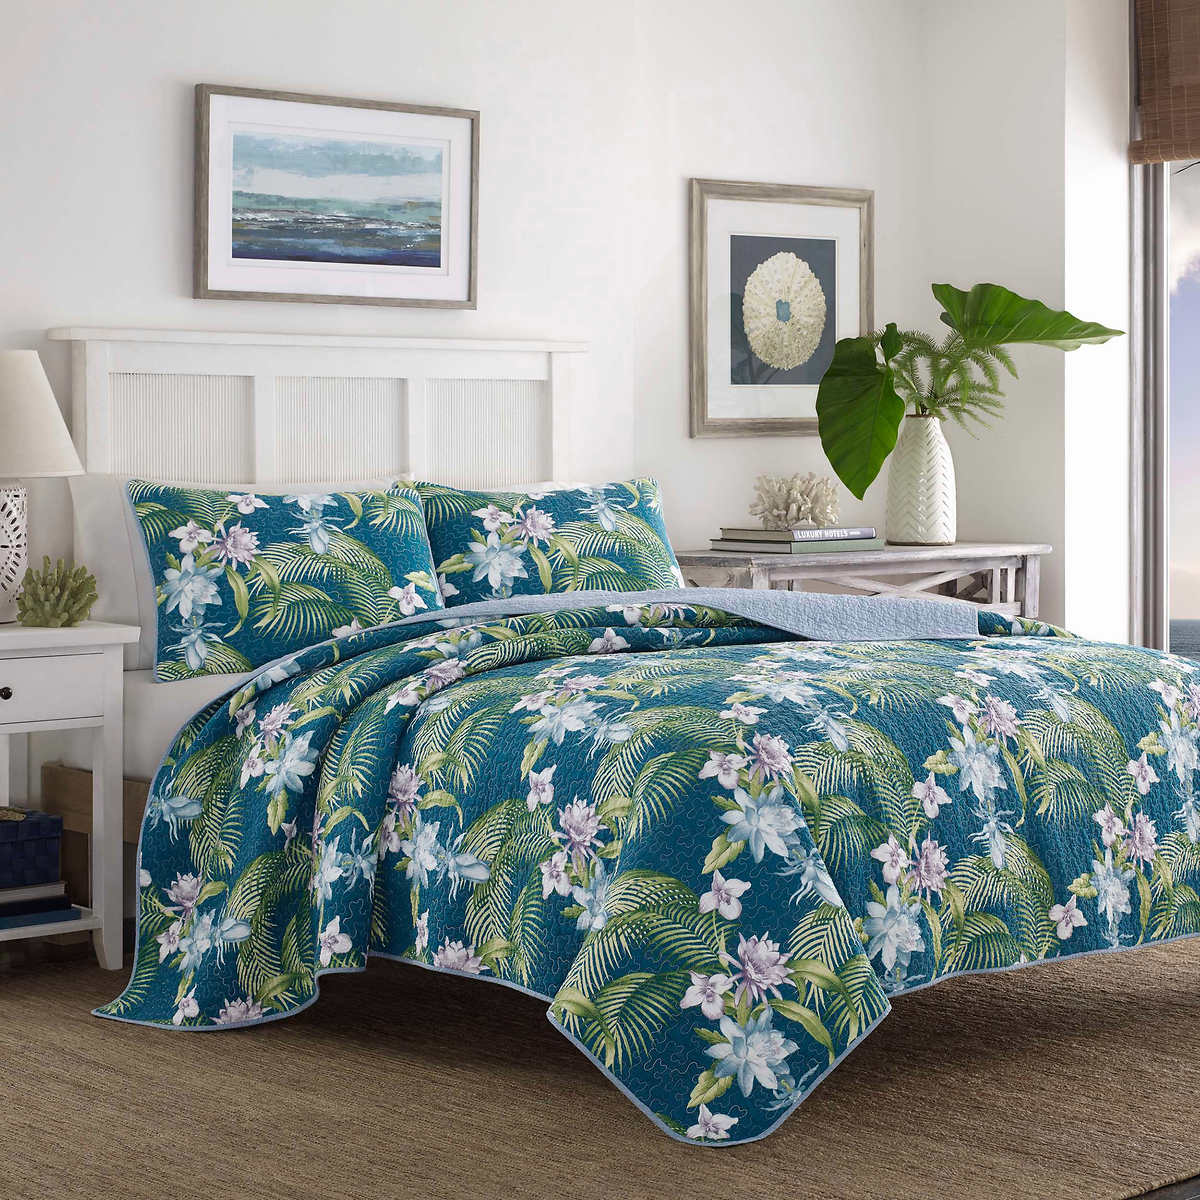 Tommy Bahama 3 Piece Quilt Set, Tommy Bahama Duvet Covers